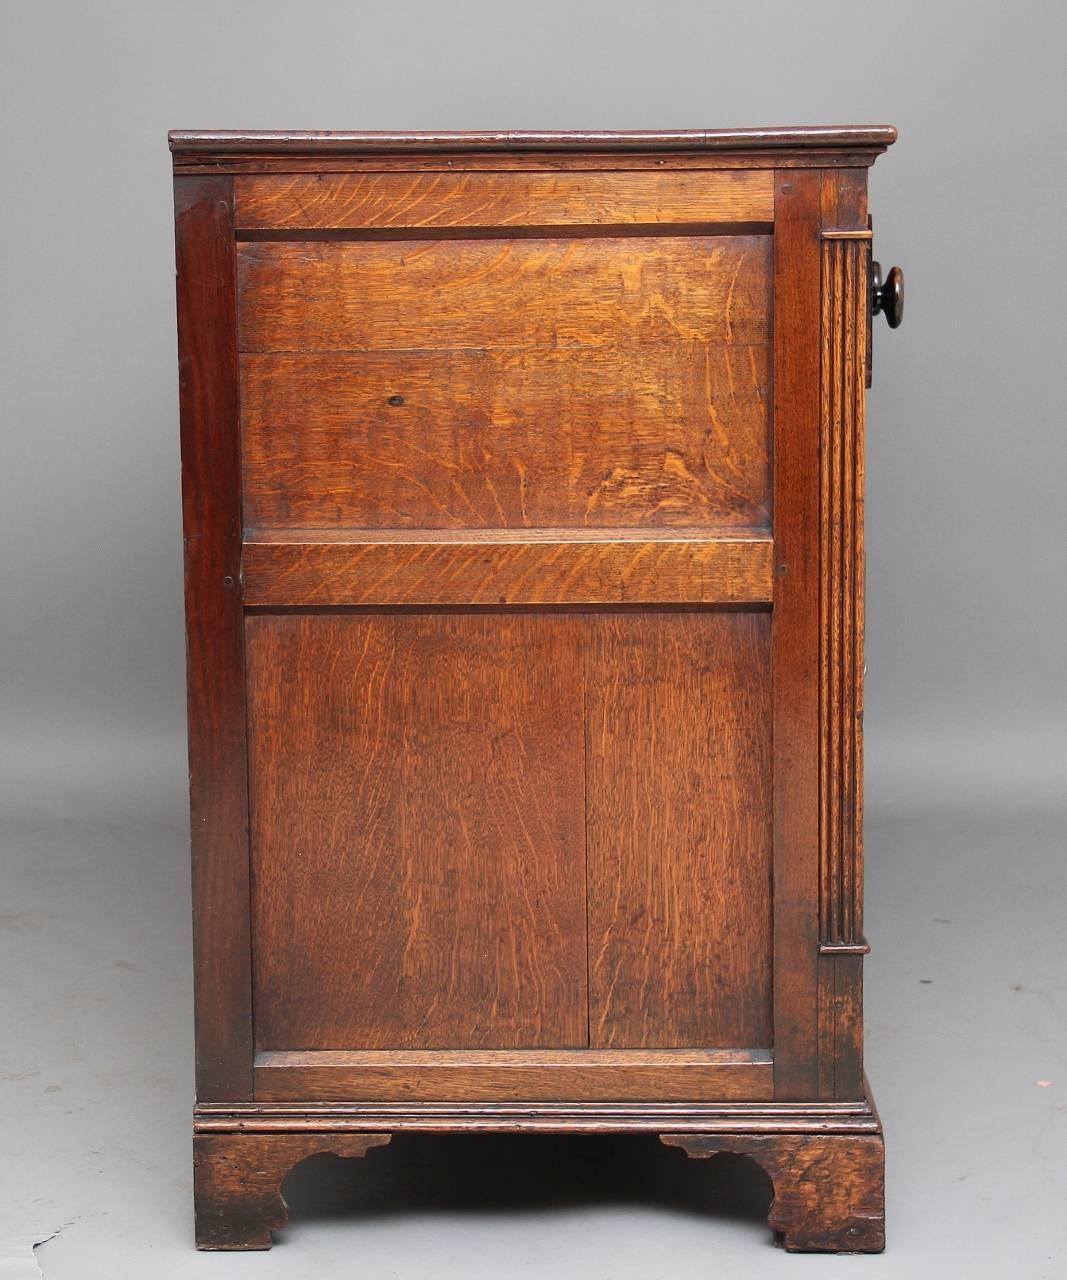 Early 19th century oak cupboard dresser base with an arrangement of six drawers, all with original turned knobs, three drawers along the top and three drawers down the center with a single cupboard either side opening to reveal a single shelf